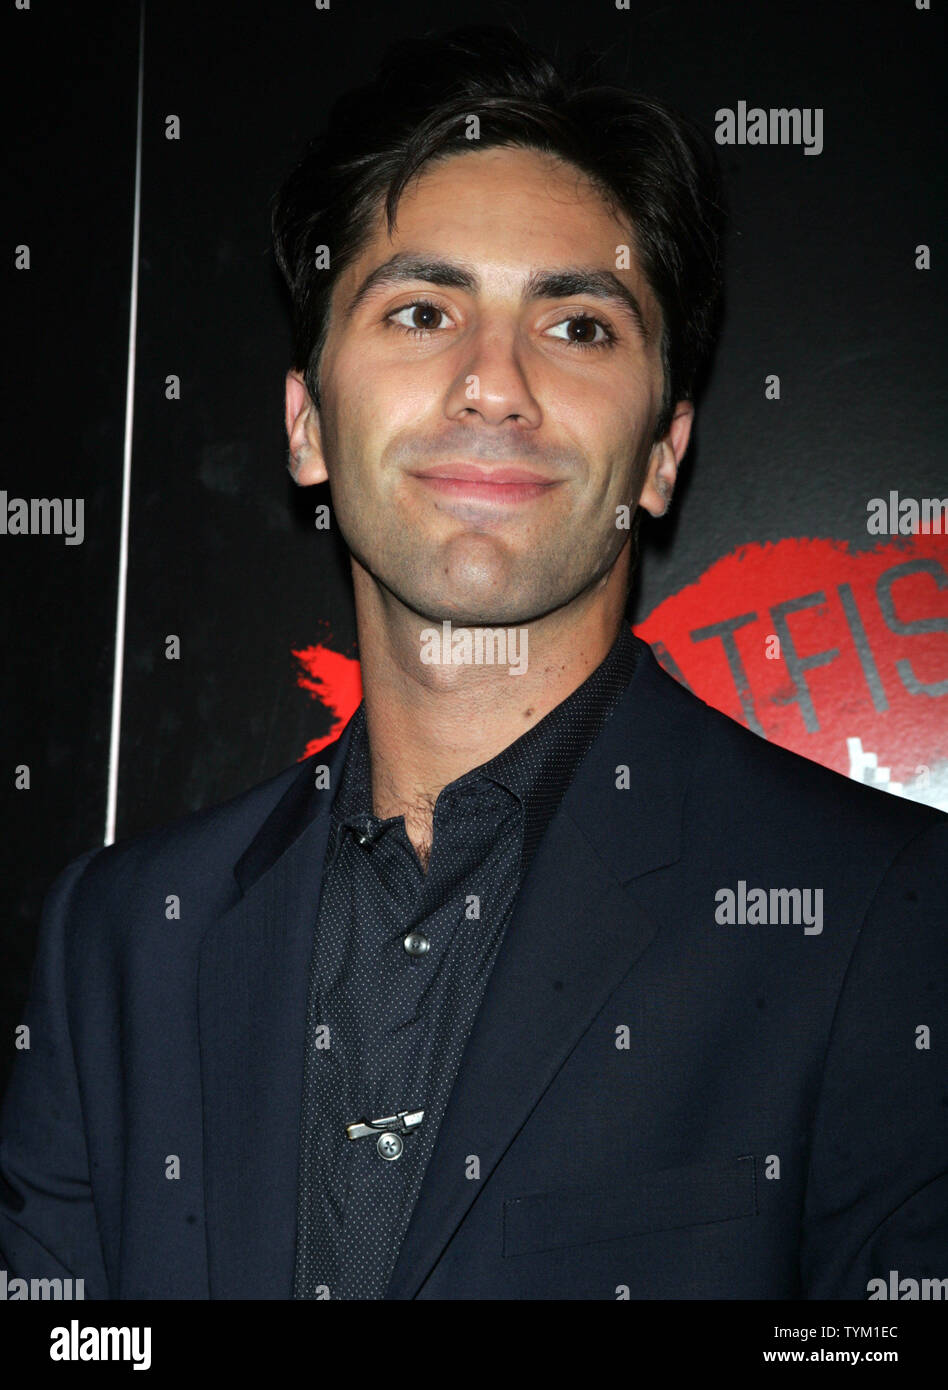 Nev Schulman arrives for the premiere of 'Catfish' at the Paris Theatre in New York on September 13, 2010.       UPI /Laura Cavanaugh Stock Photo